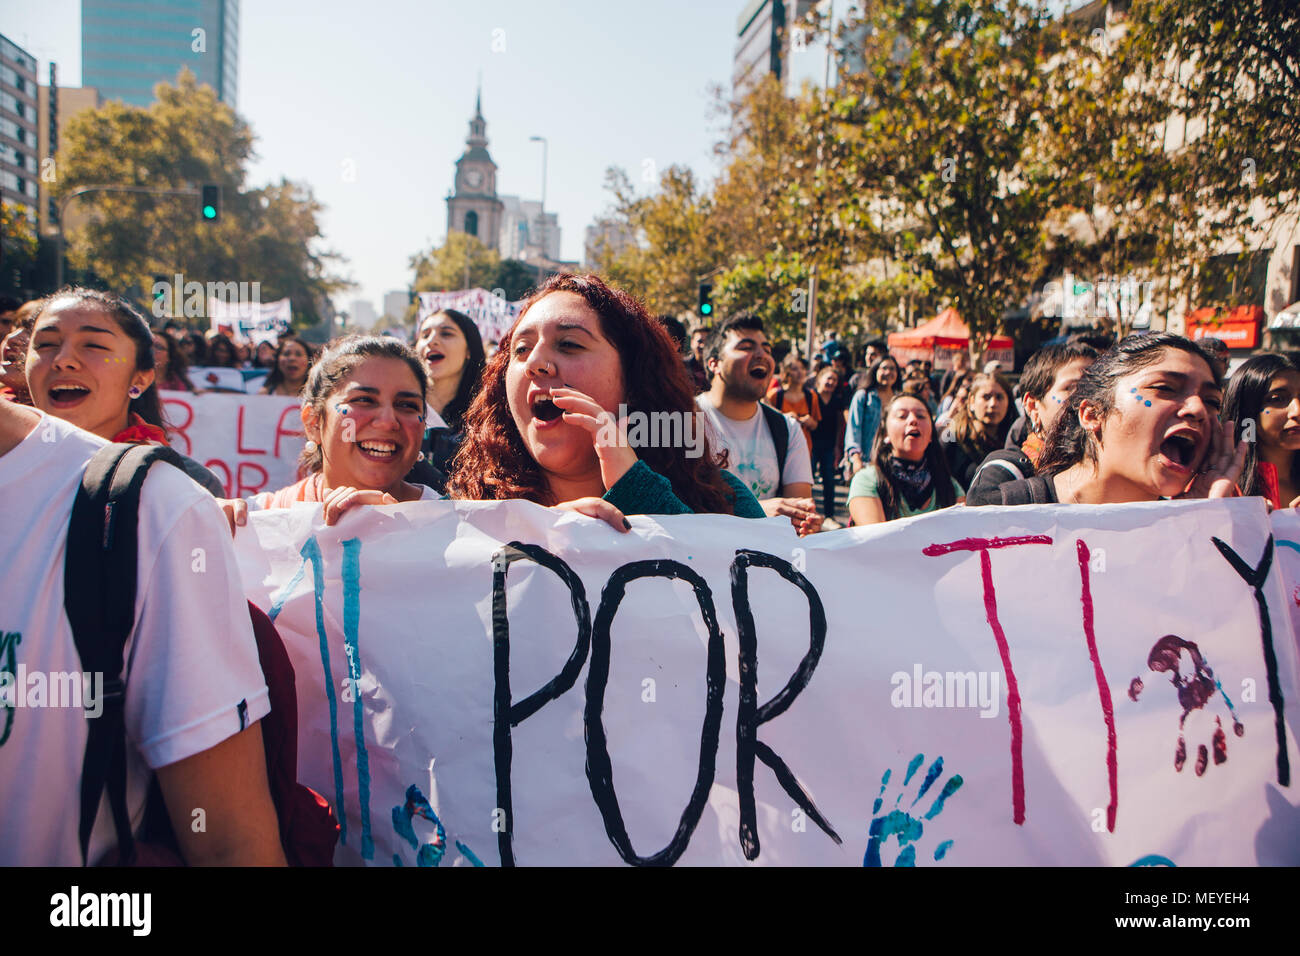 Santiago, Chile - April 19, 2018: Chileans marched through Santiago's streets, demanding an end to the Profit in the Education Stock Photo